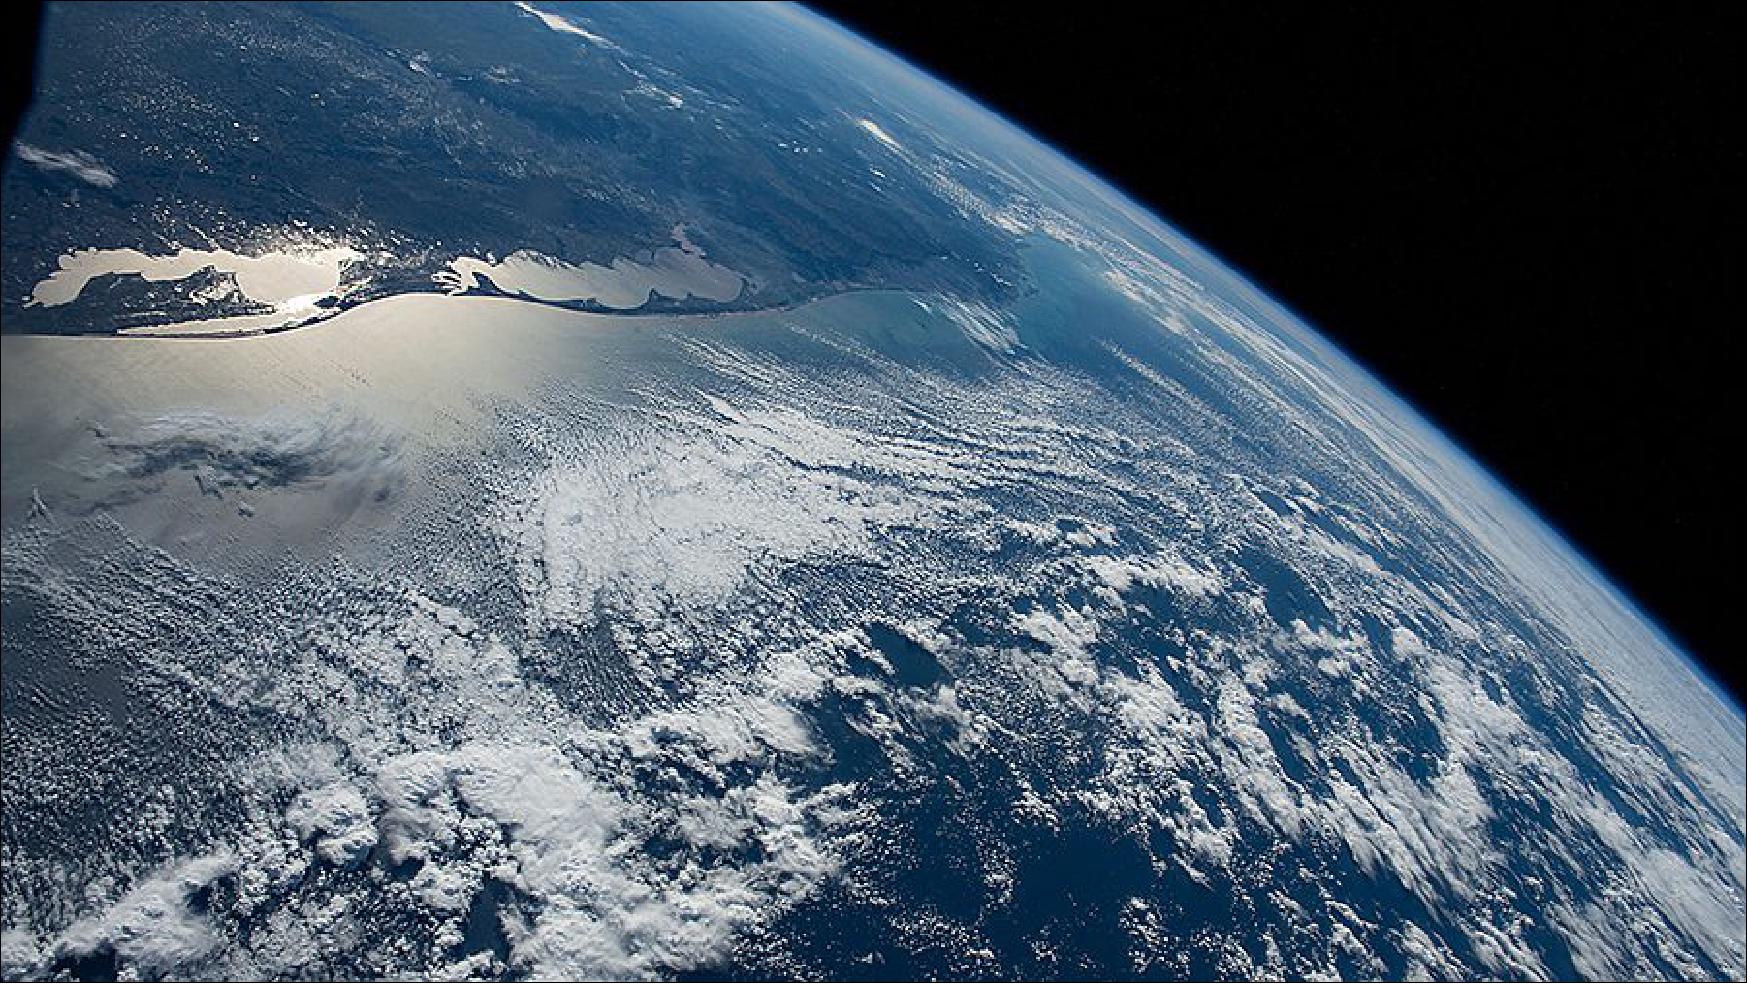 Figure 11: The southern tip of Brazil (upper left) bordering Uruguay was pictured as the International Space Station orbited off the Atlantic coast of South America (image credit: NASA)